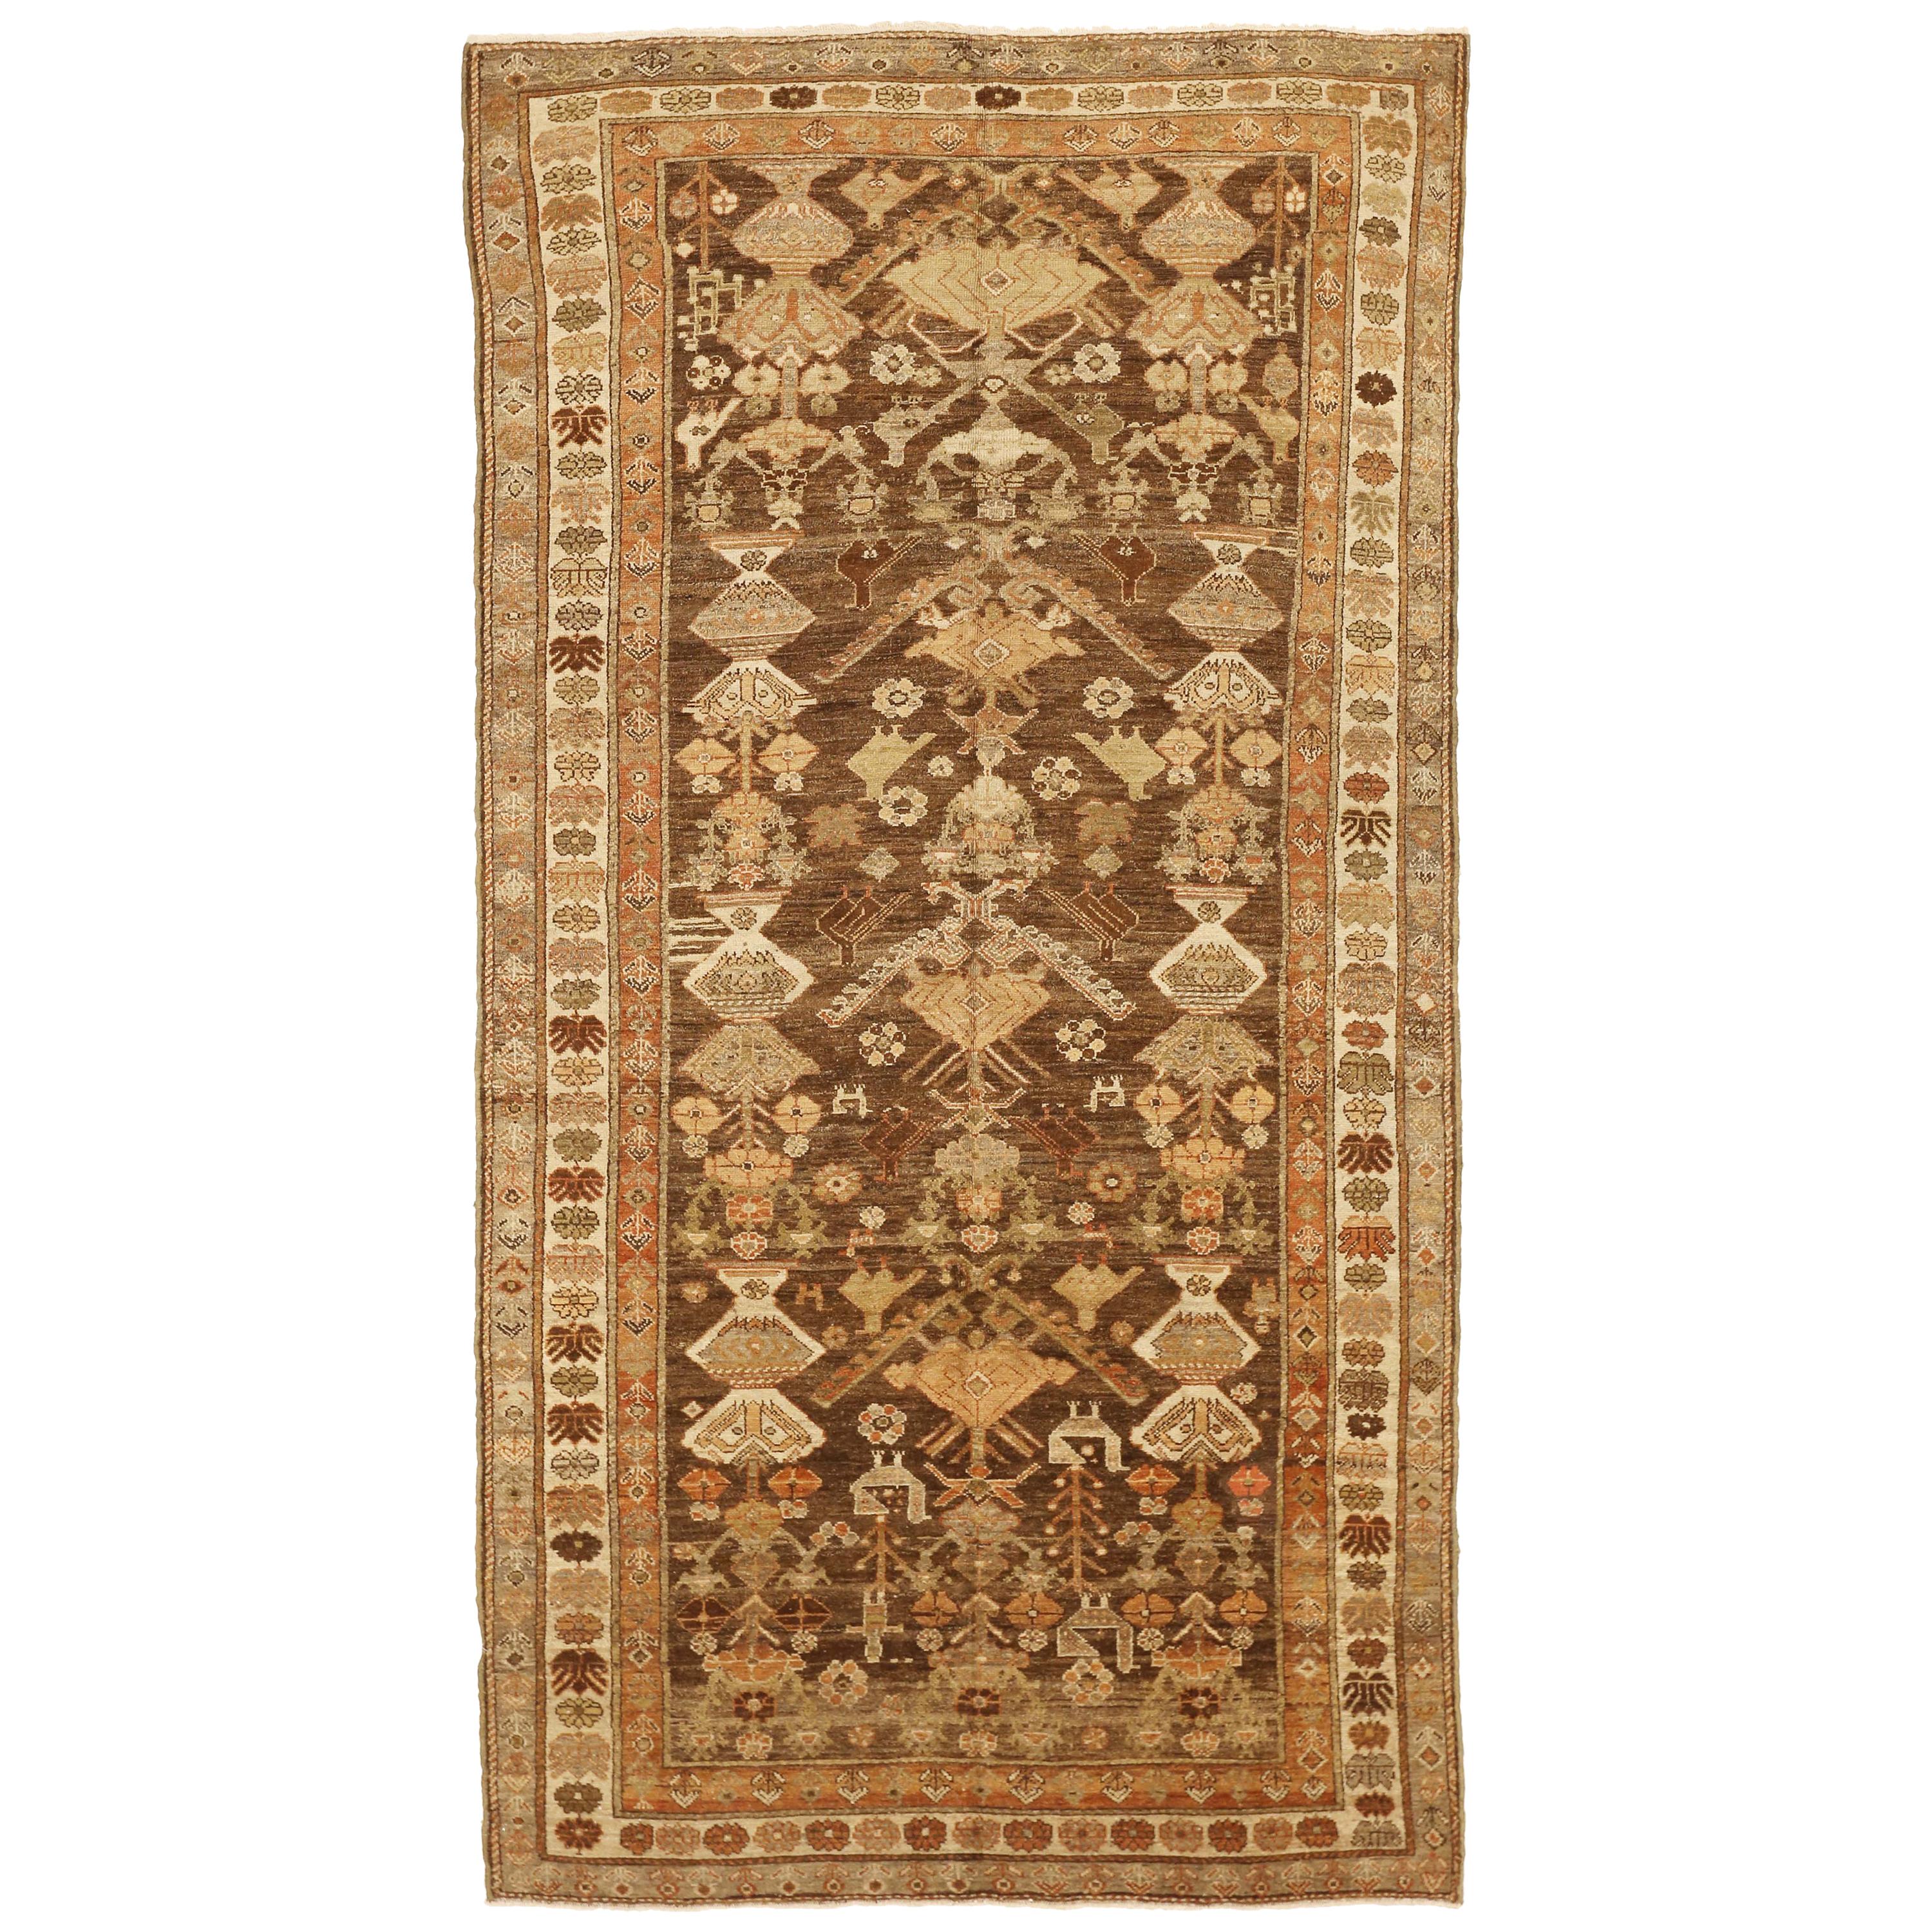 Antique Persian Saveh Rug with Brown and Ivory Floral Patterns